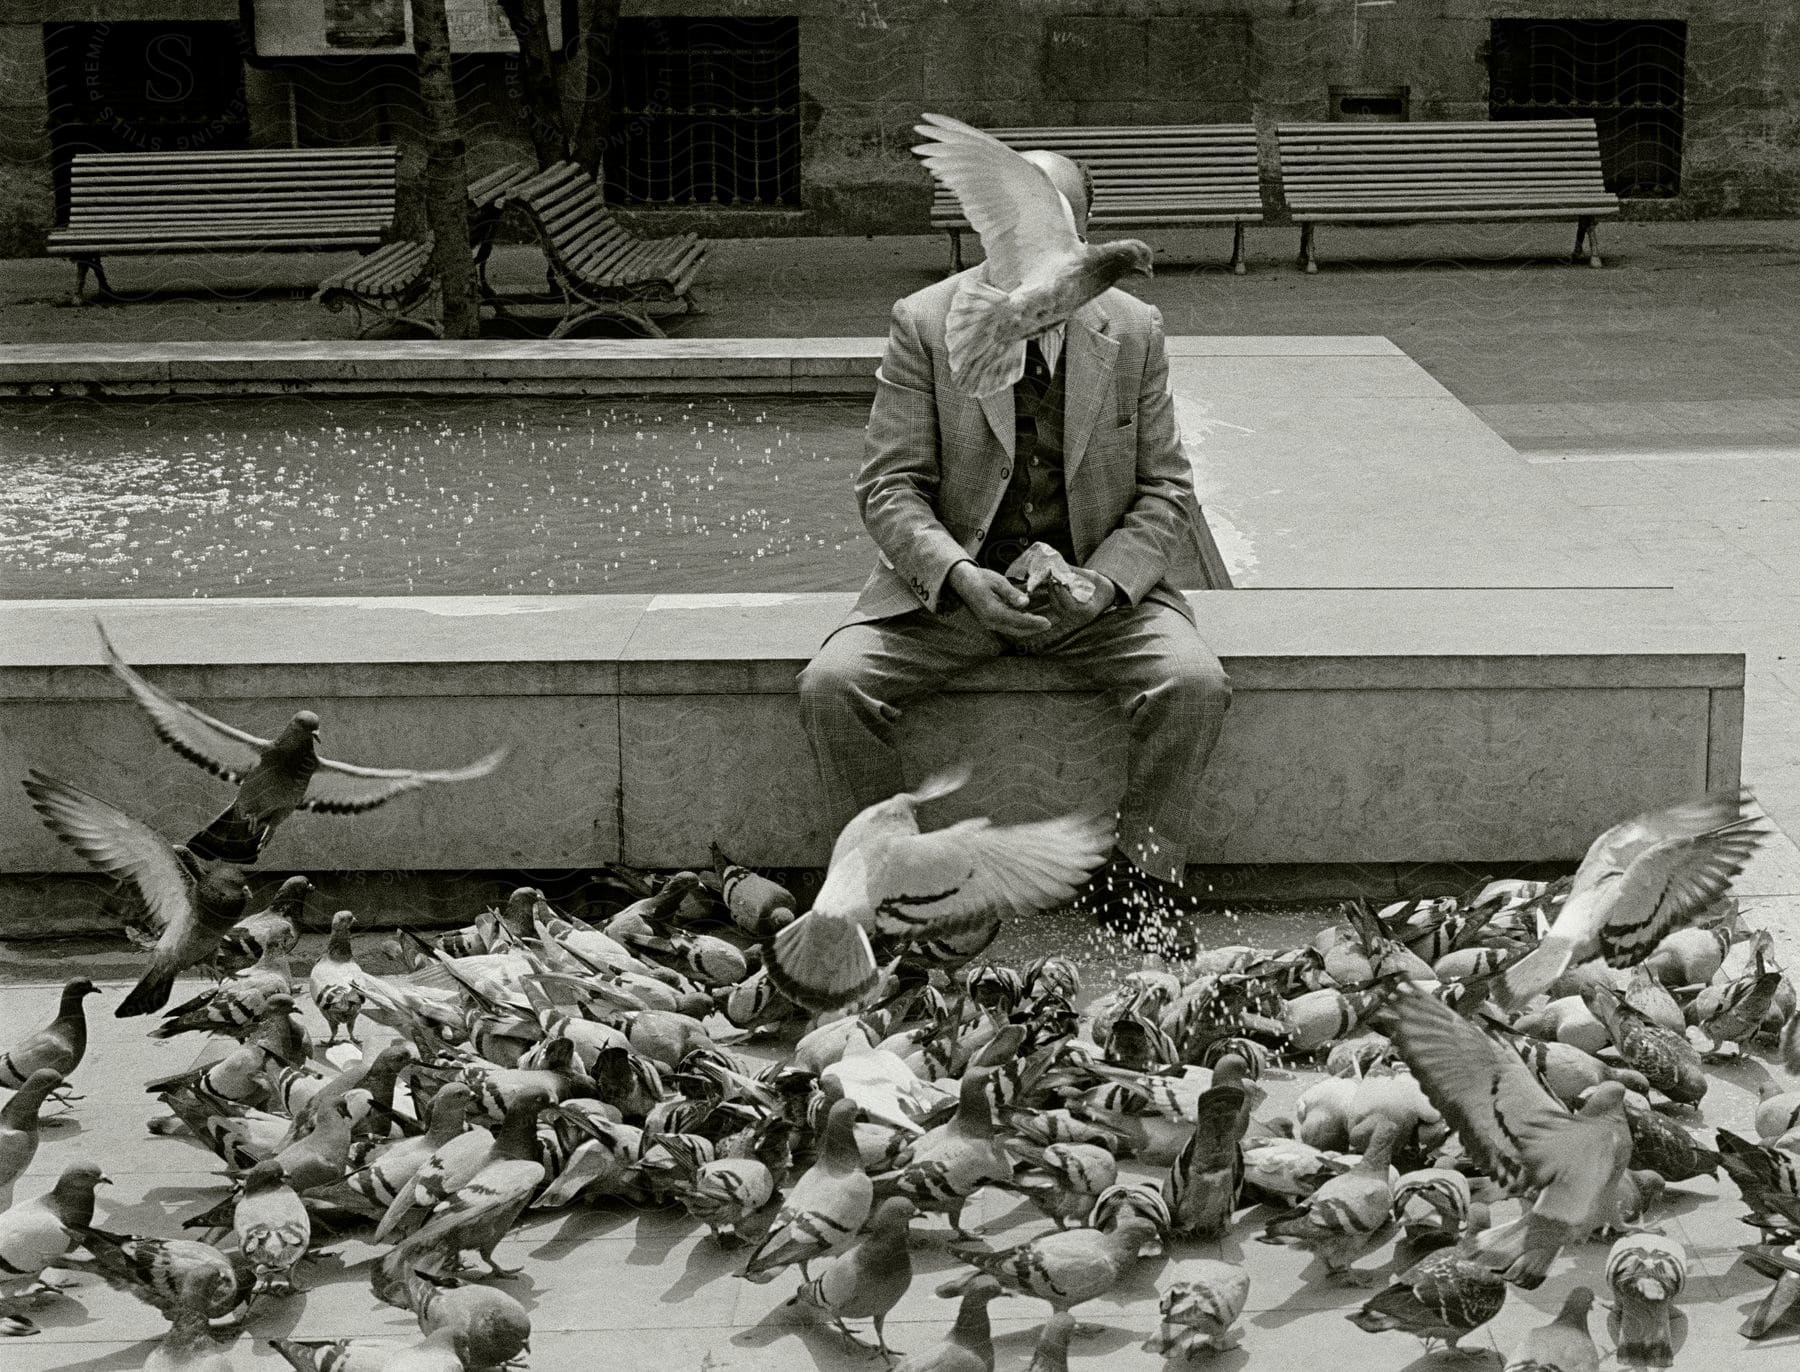 A man sitting on a bench with a water fence and many doves on the ground in front of him